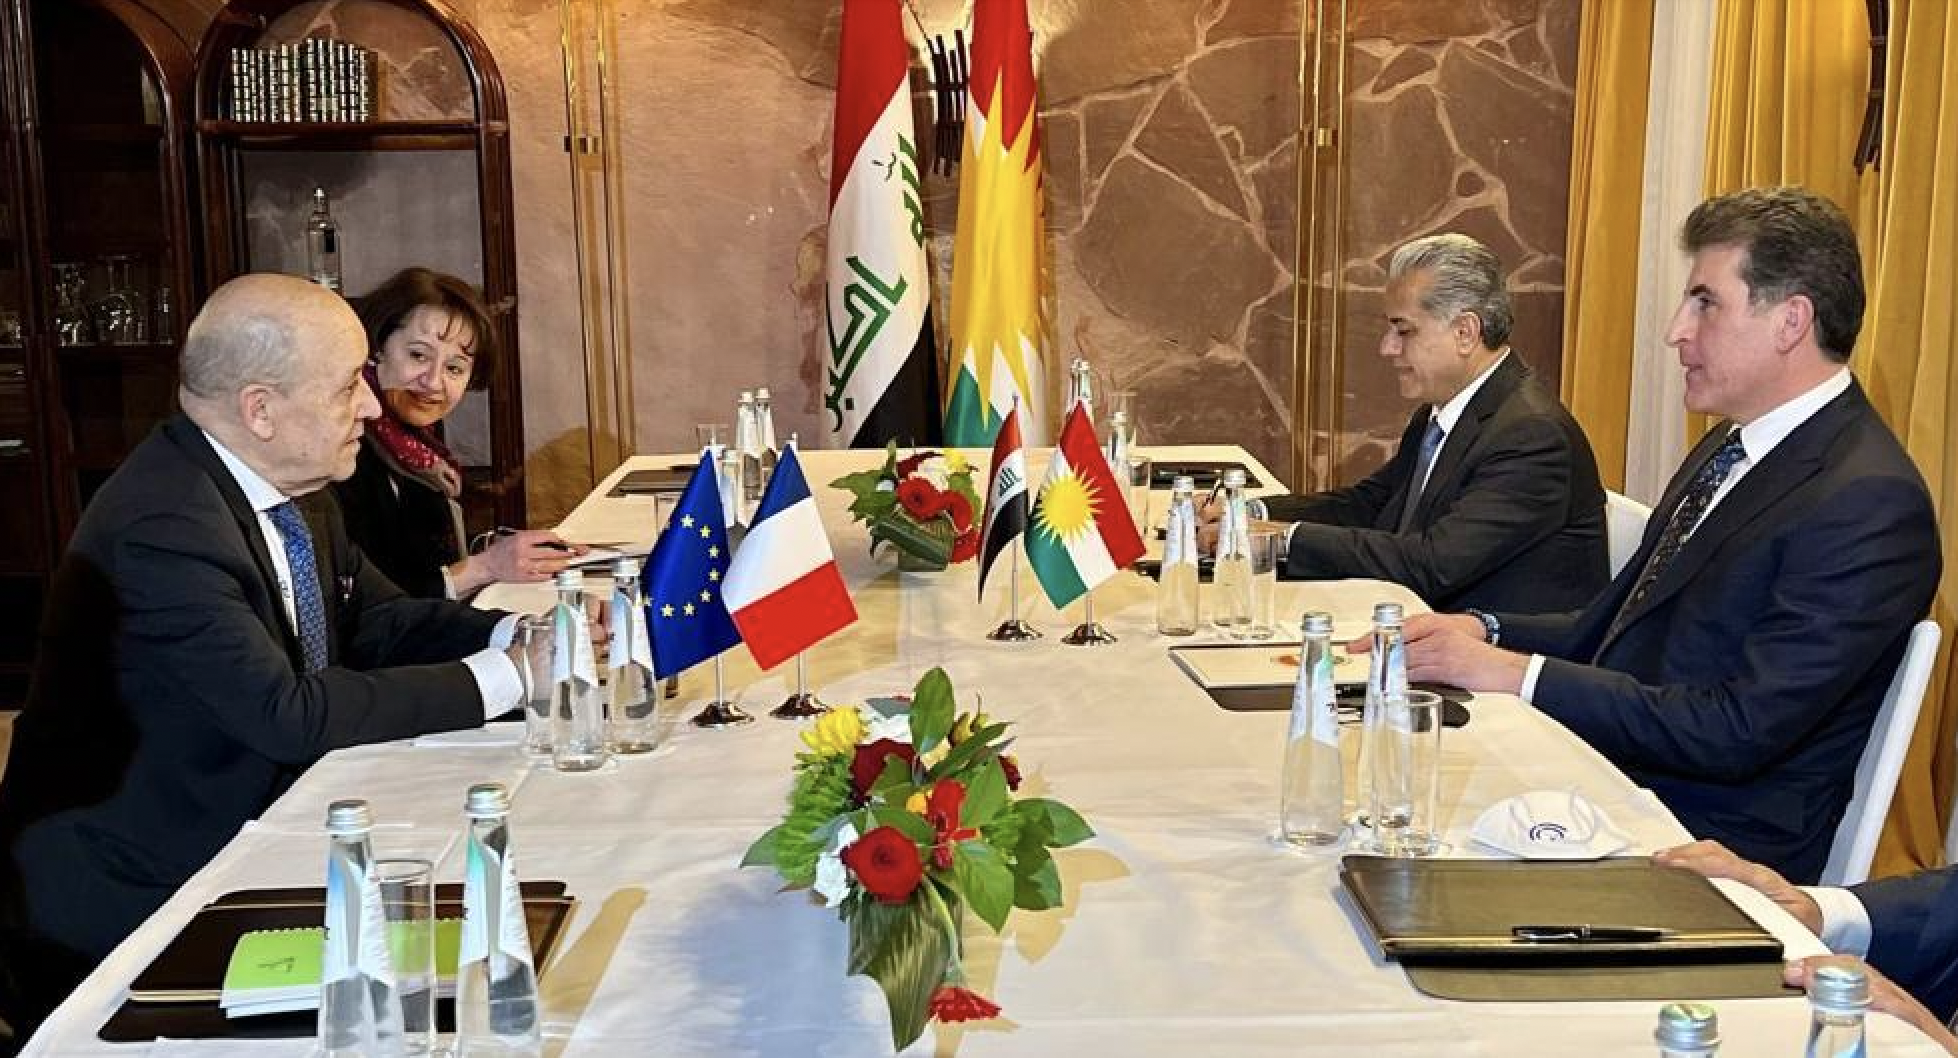 Kurdistan's President meet in Munich with French Foreign Minister 